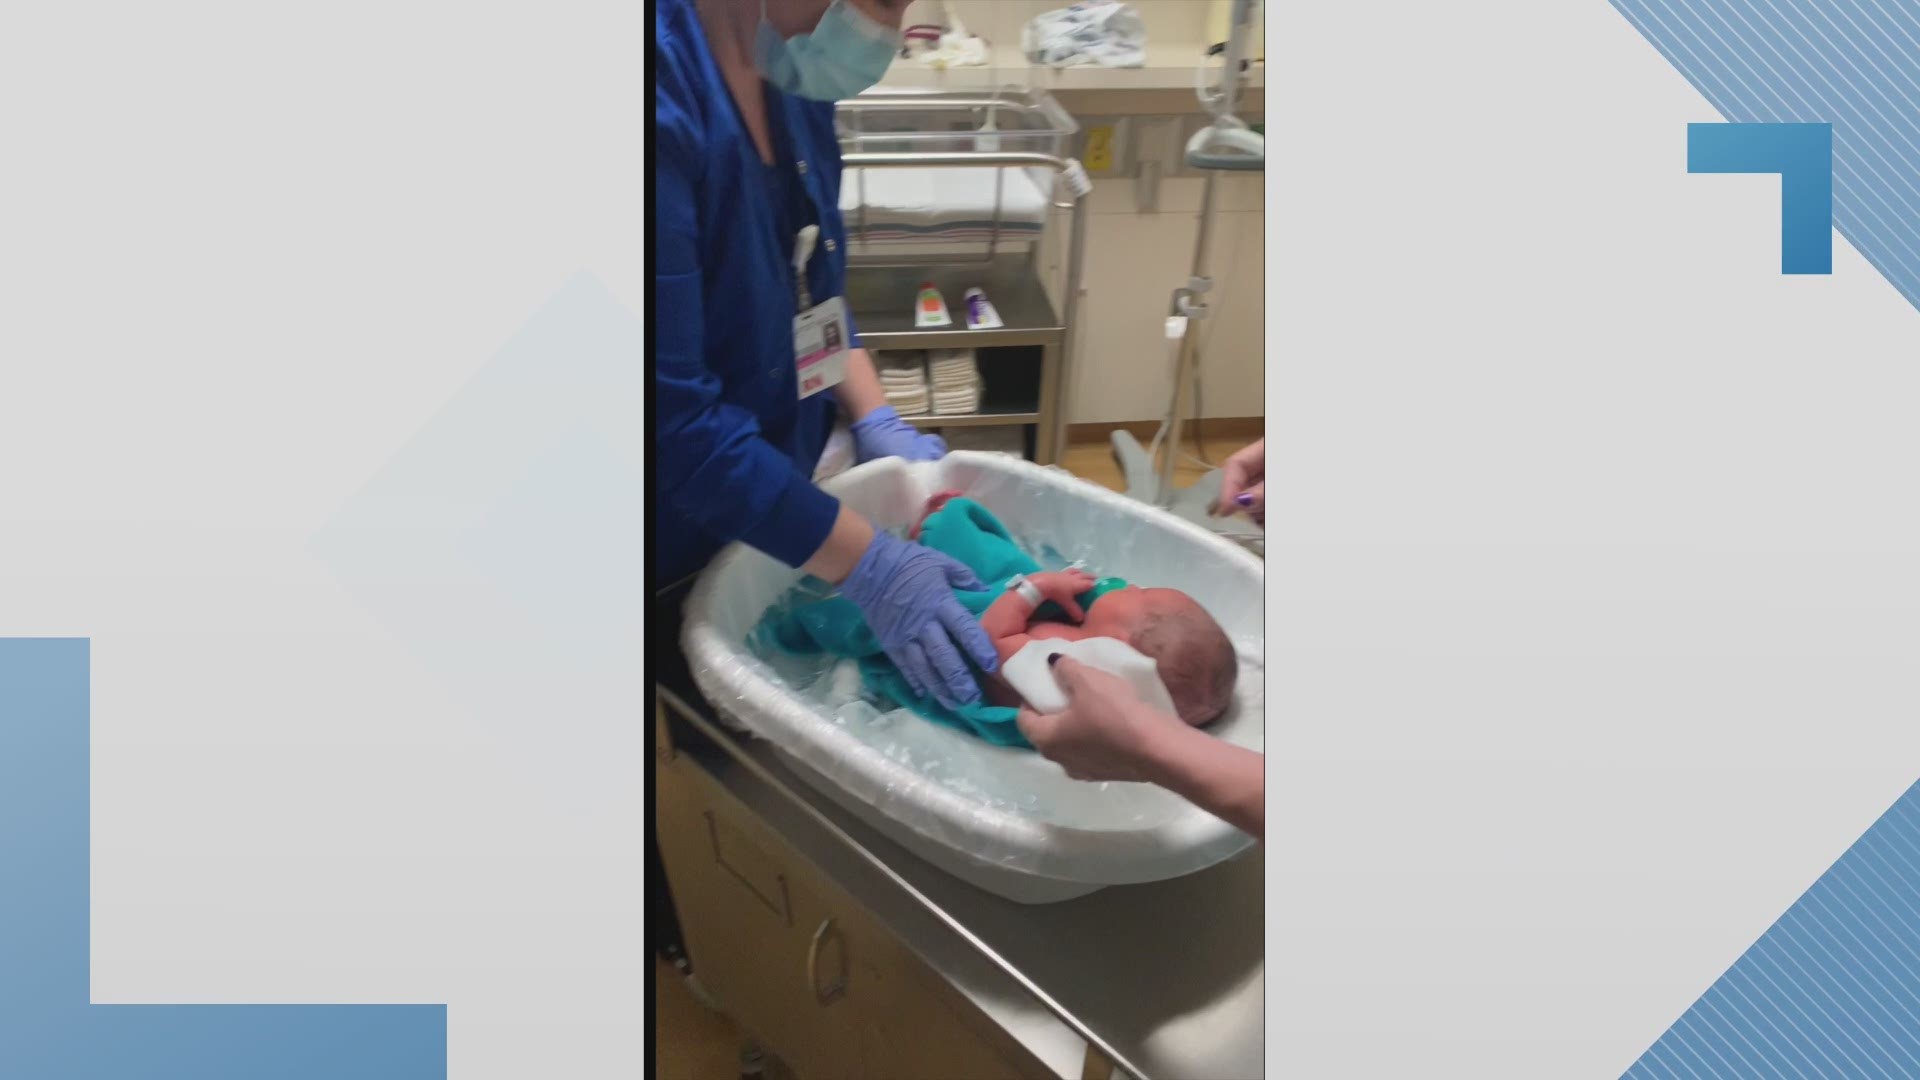 Baptist Health is implementing a new method of bathing newborns that gives them more comfort and security.